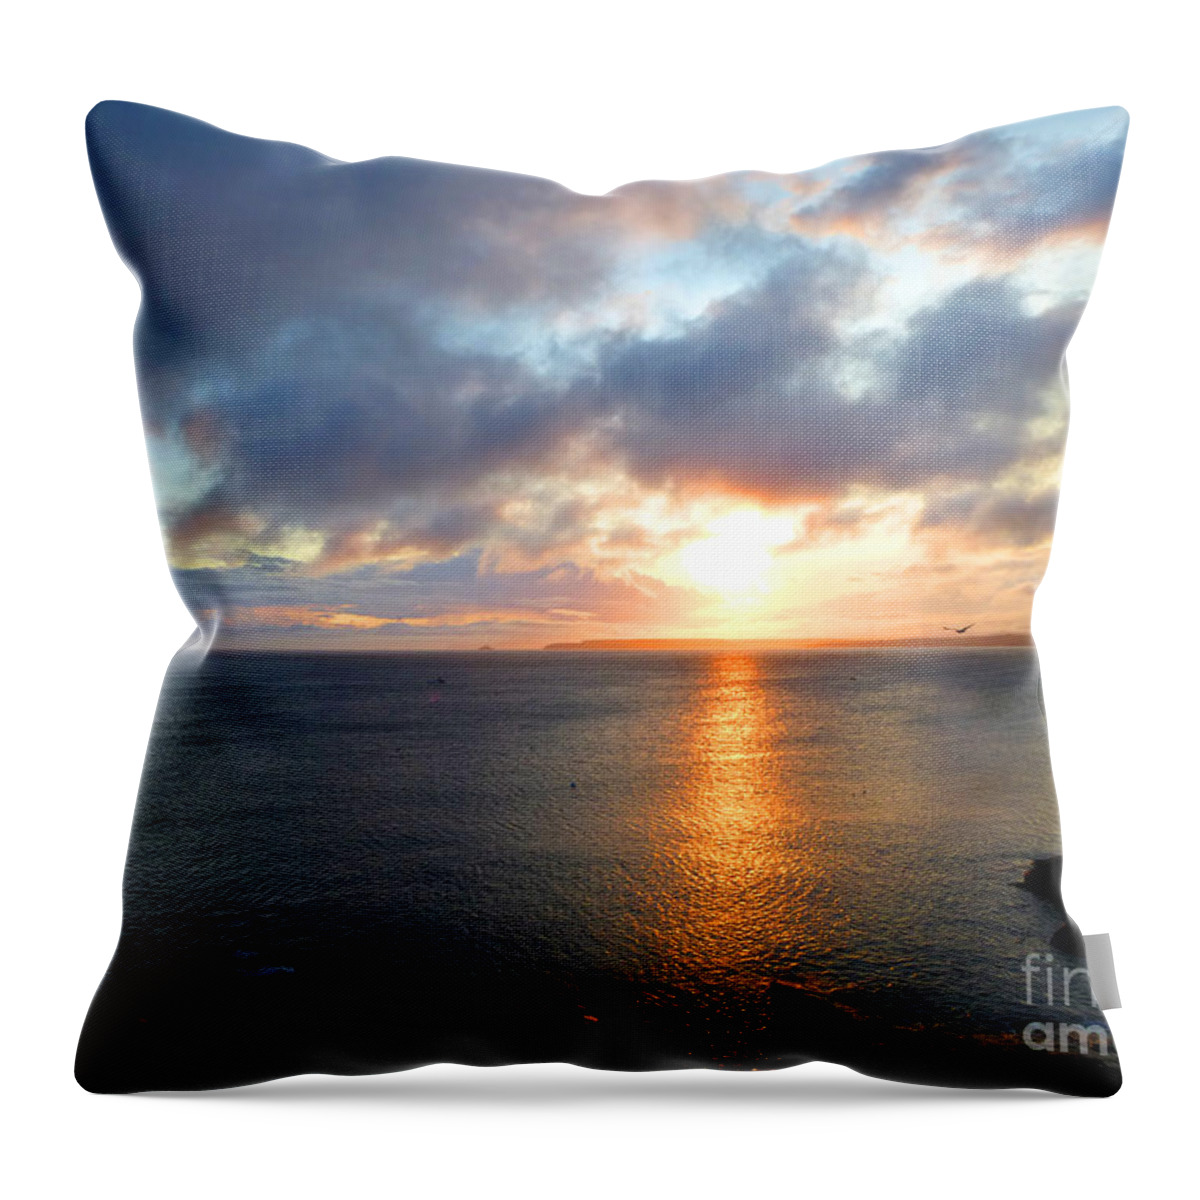 Background Throw Pillow featuring the photograph St Ives Bay Sunrise After Storm by Christopher Gill